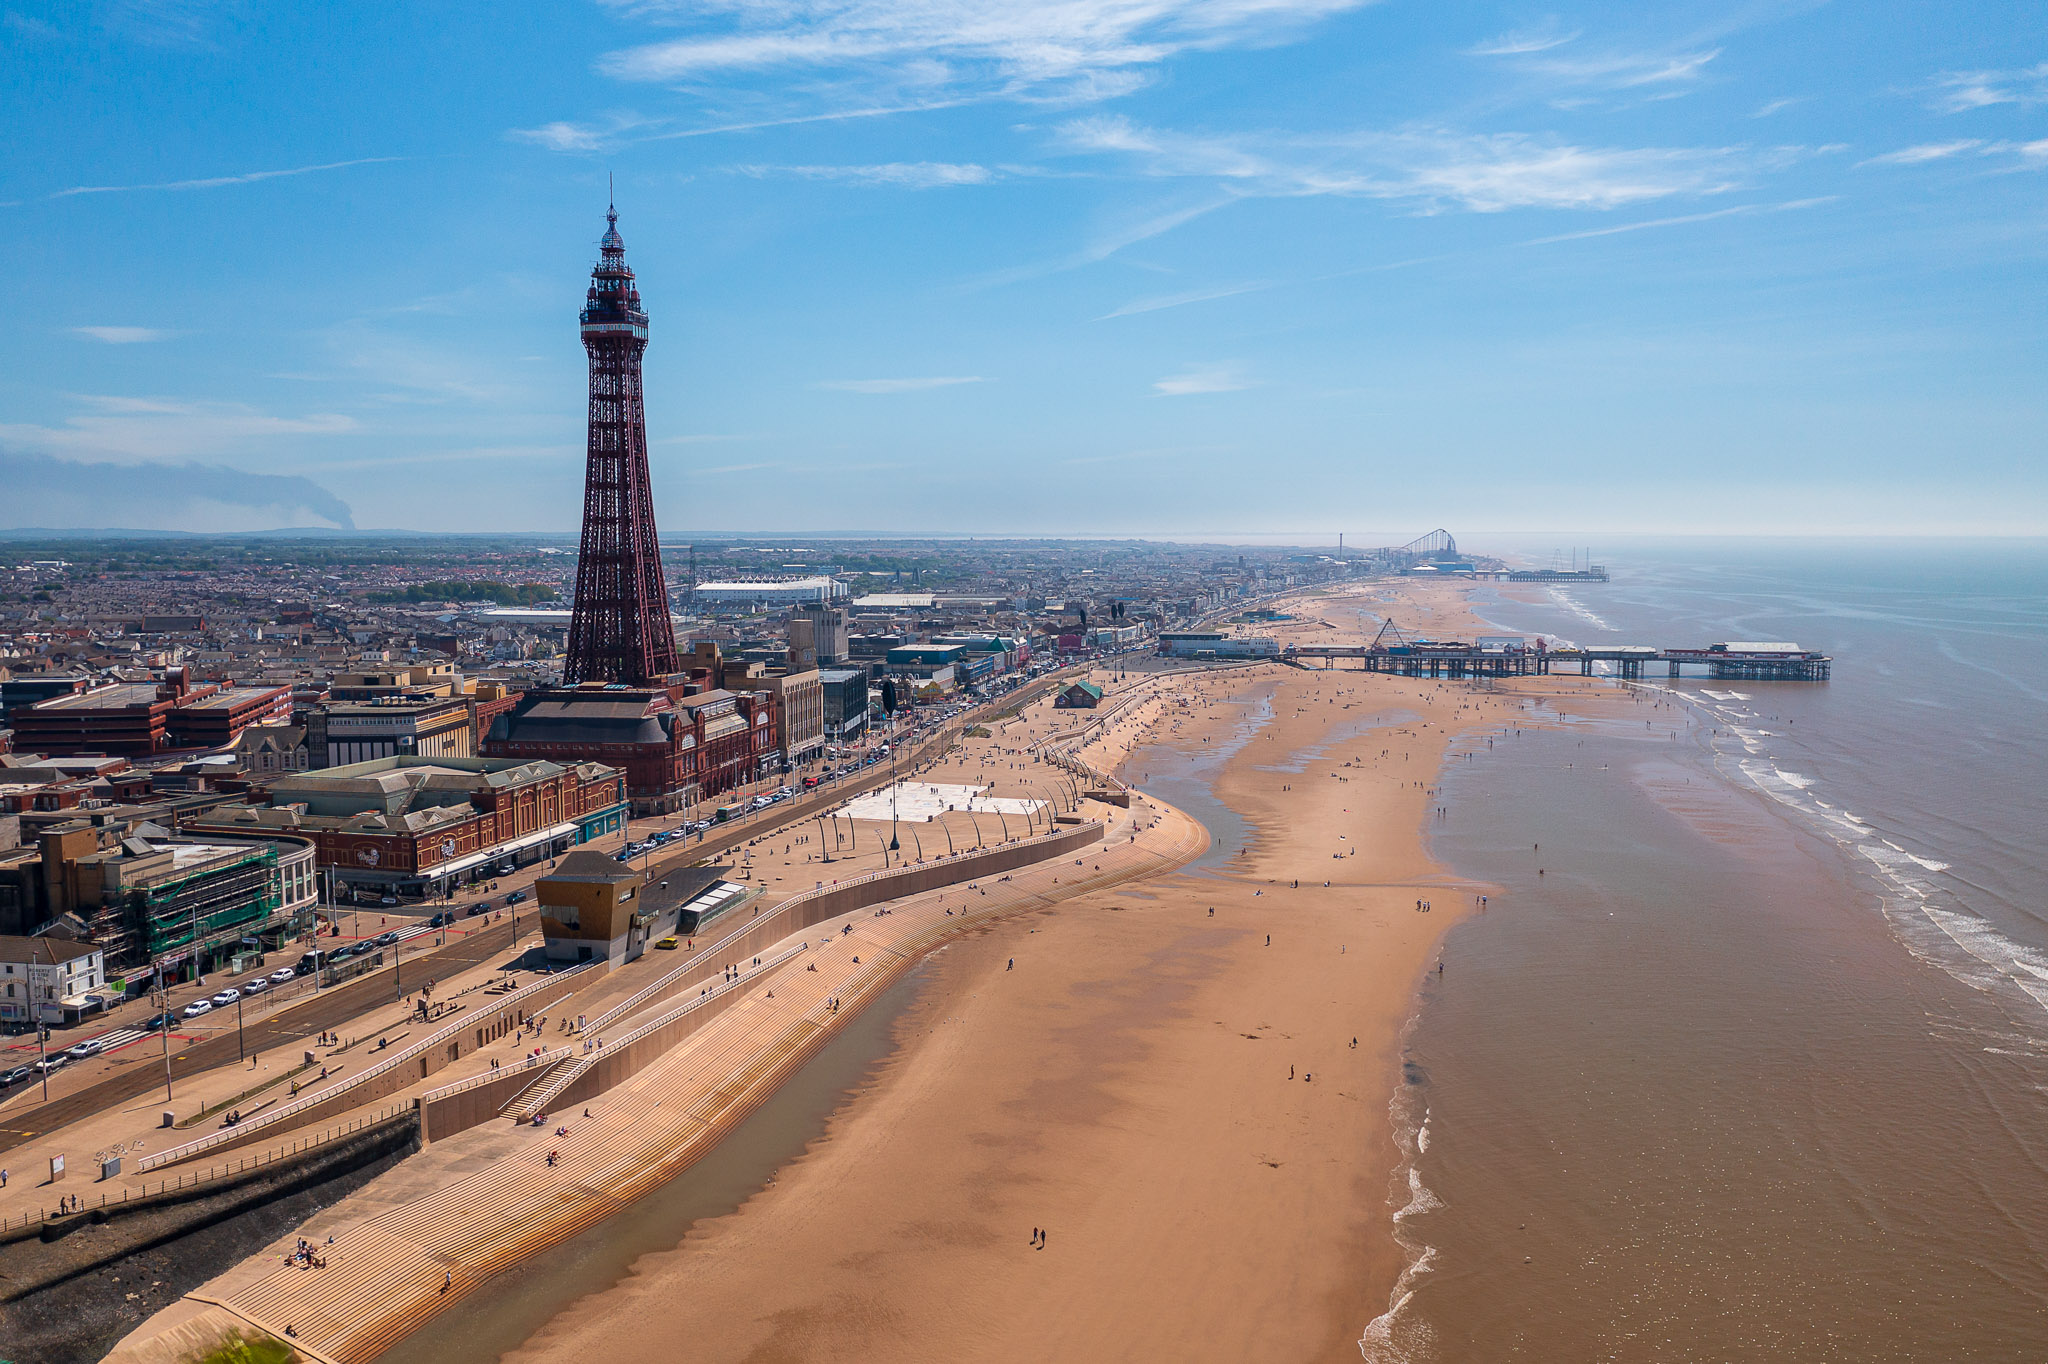 Blackpool Tower overlooking the beach